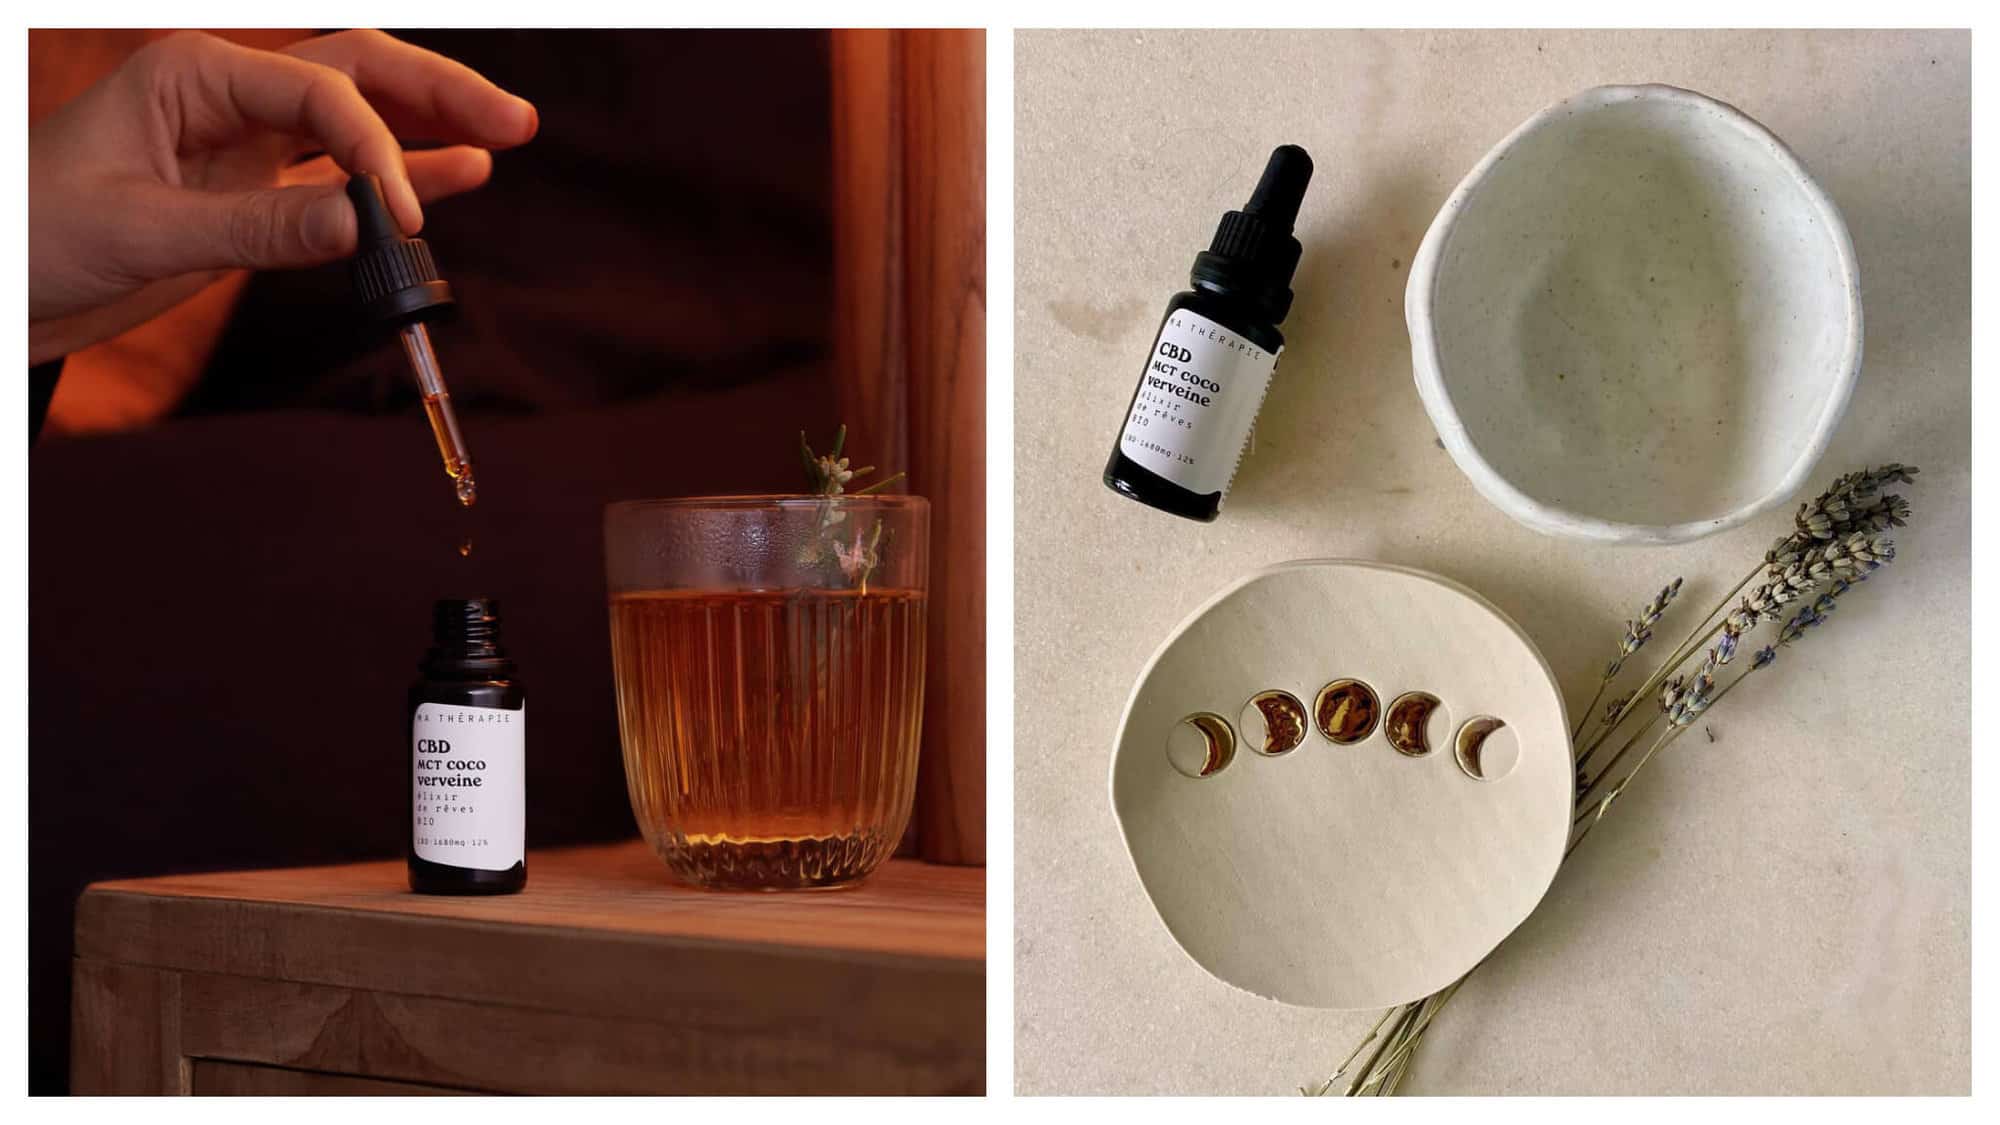 Left: a woman putting some drops of Ma Thérapie's CBD elixir into a glass of tea. Right: a bottle of Ma Thérapie's CBD elixir next to a bowl, plate, and sprigs of lavender. 